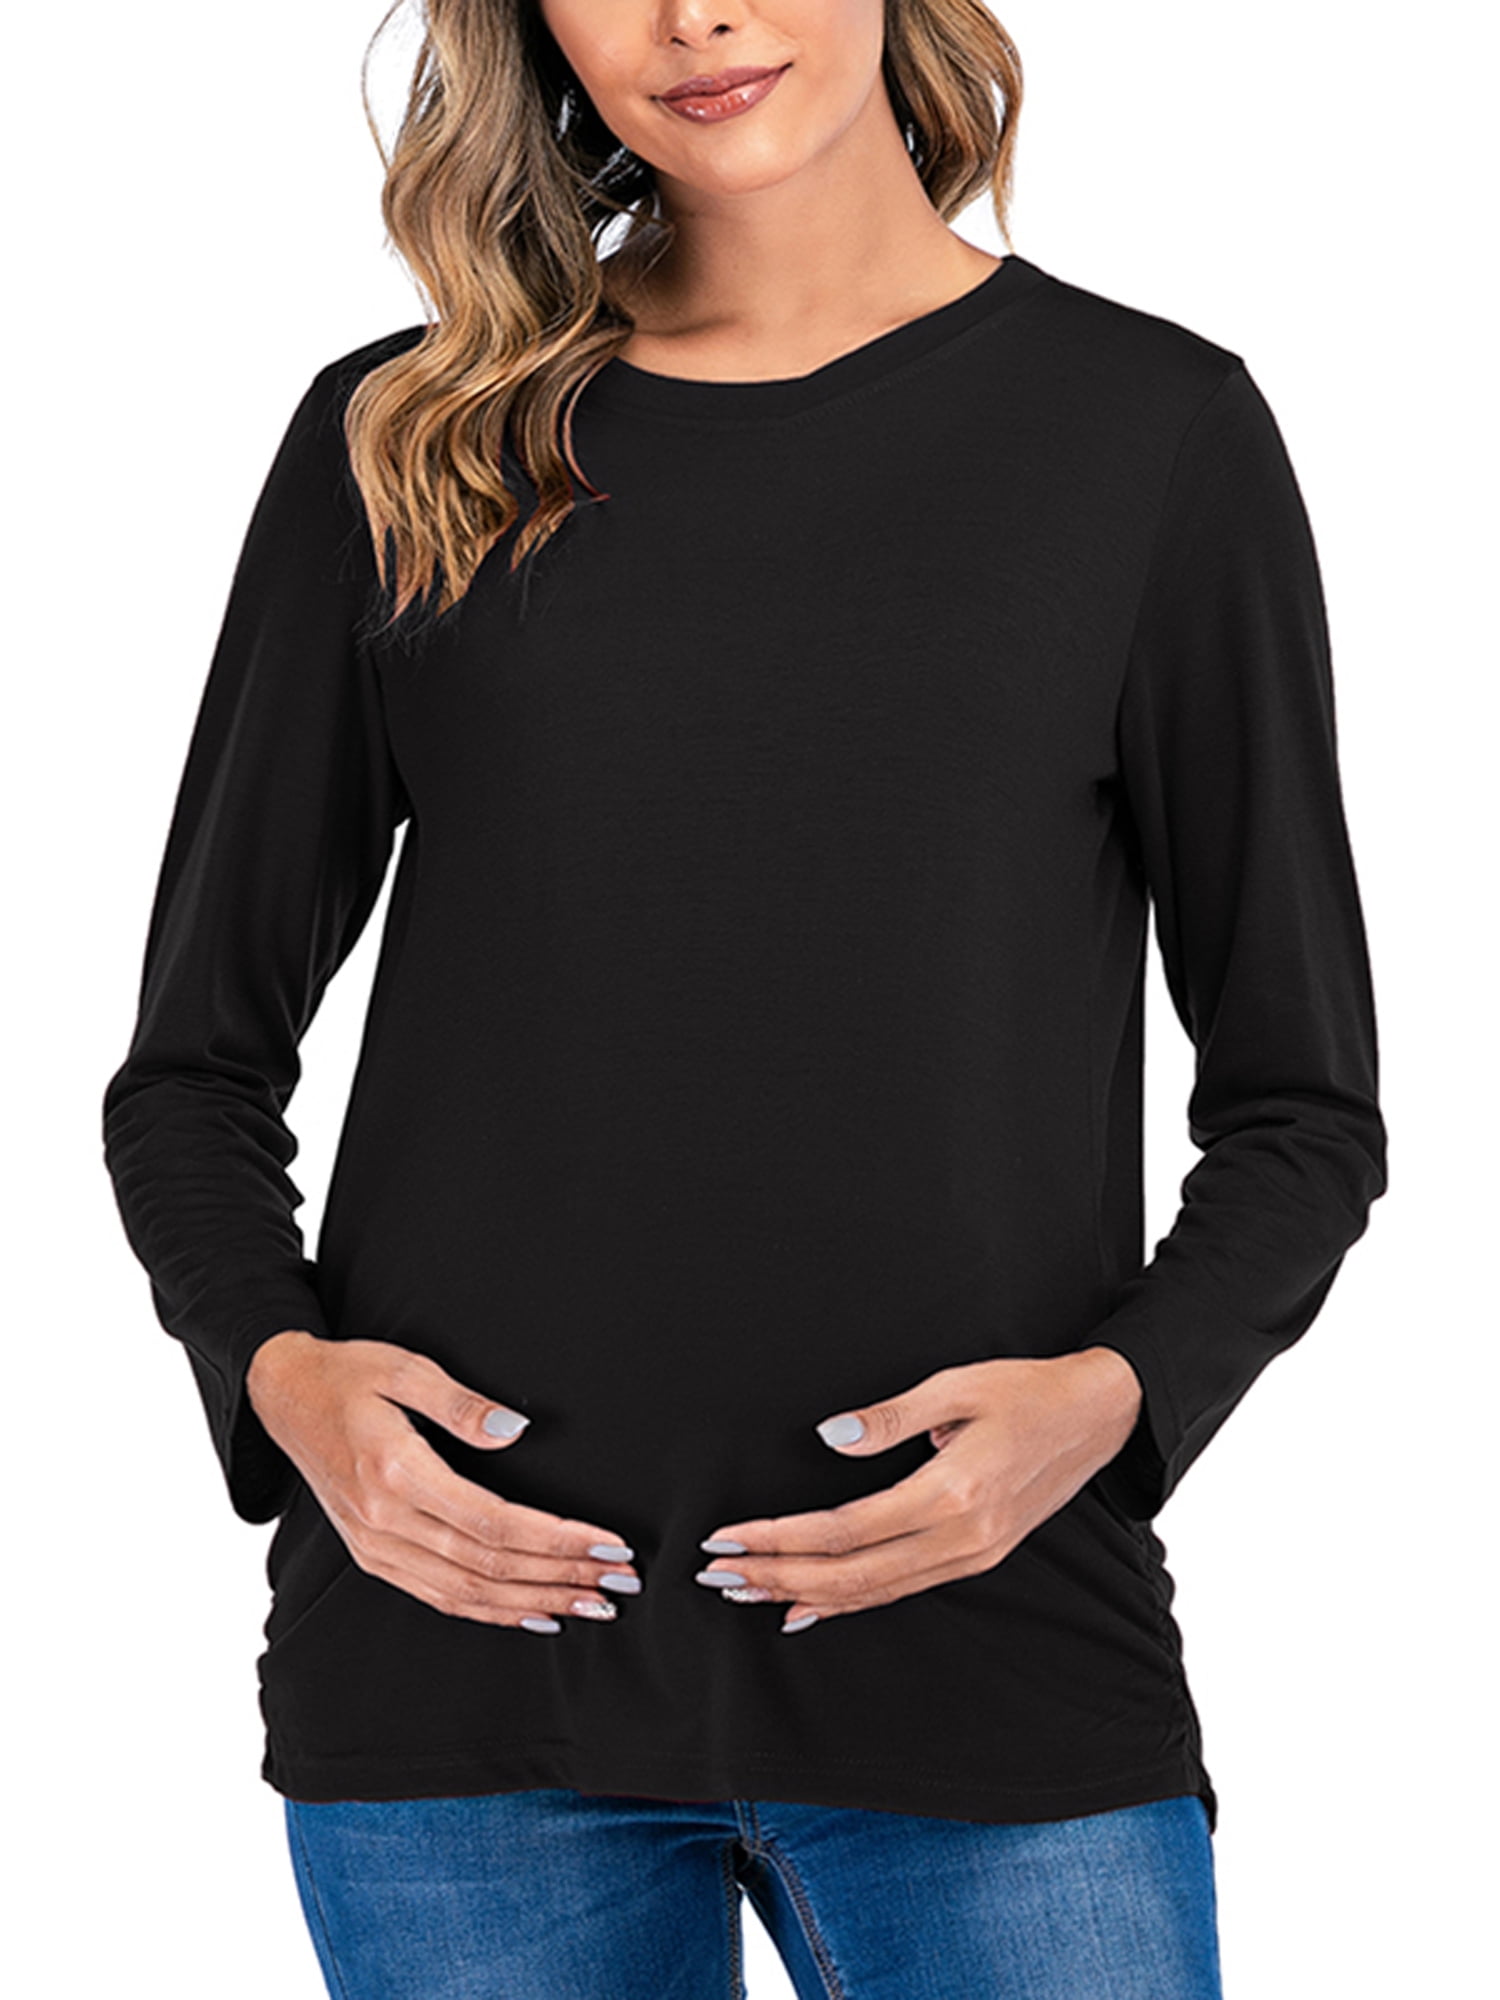 Wodstyle - Women's Pregnant Maternity Long Sleeve Tee Casual Plain ...